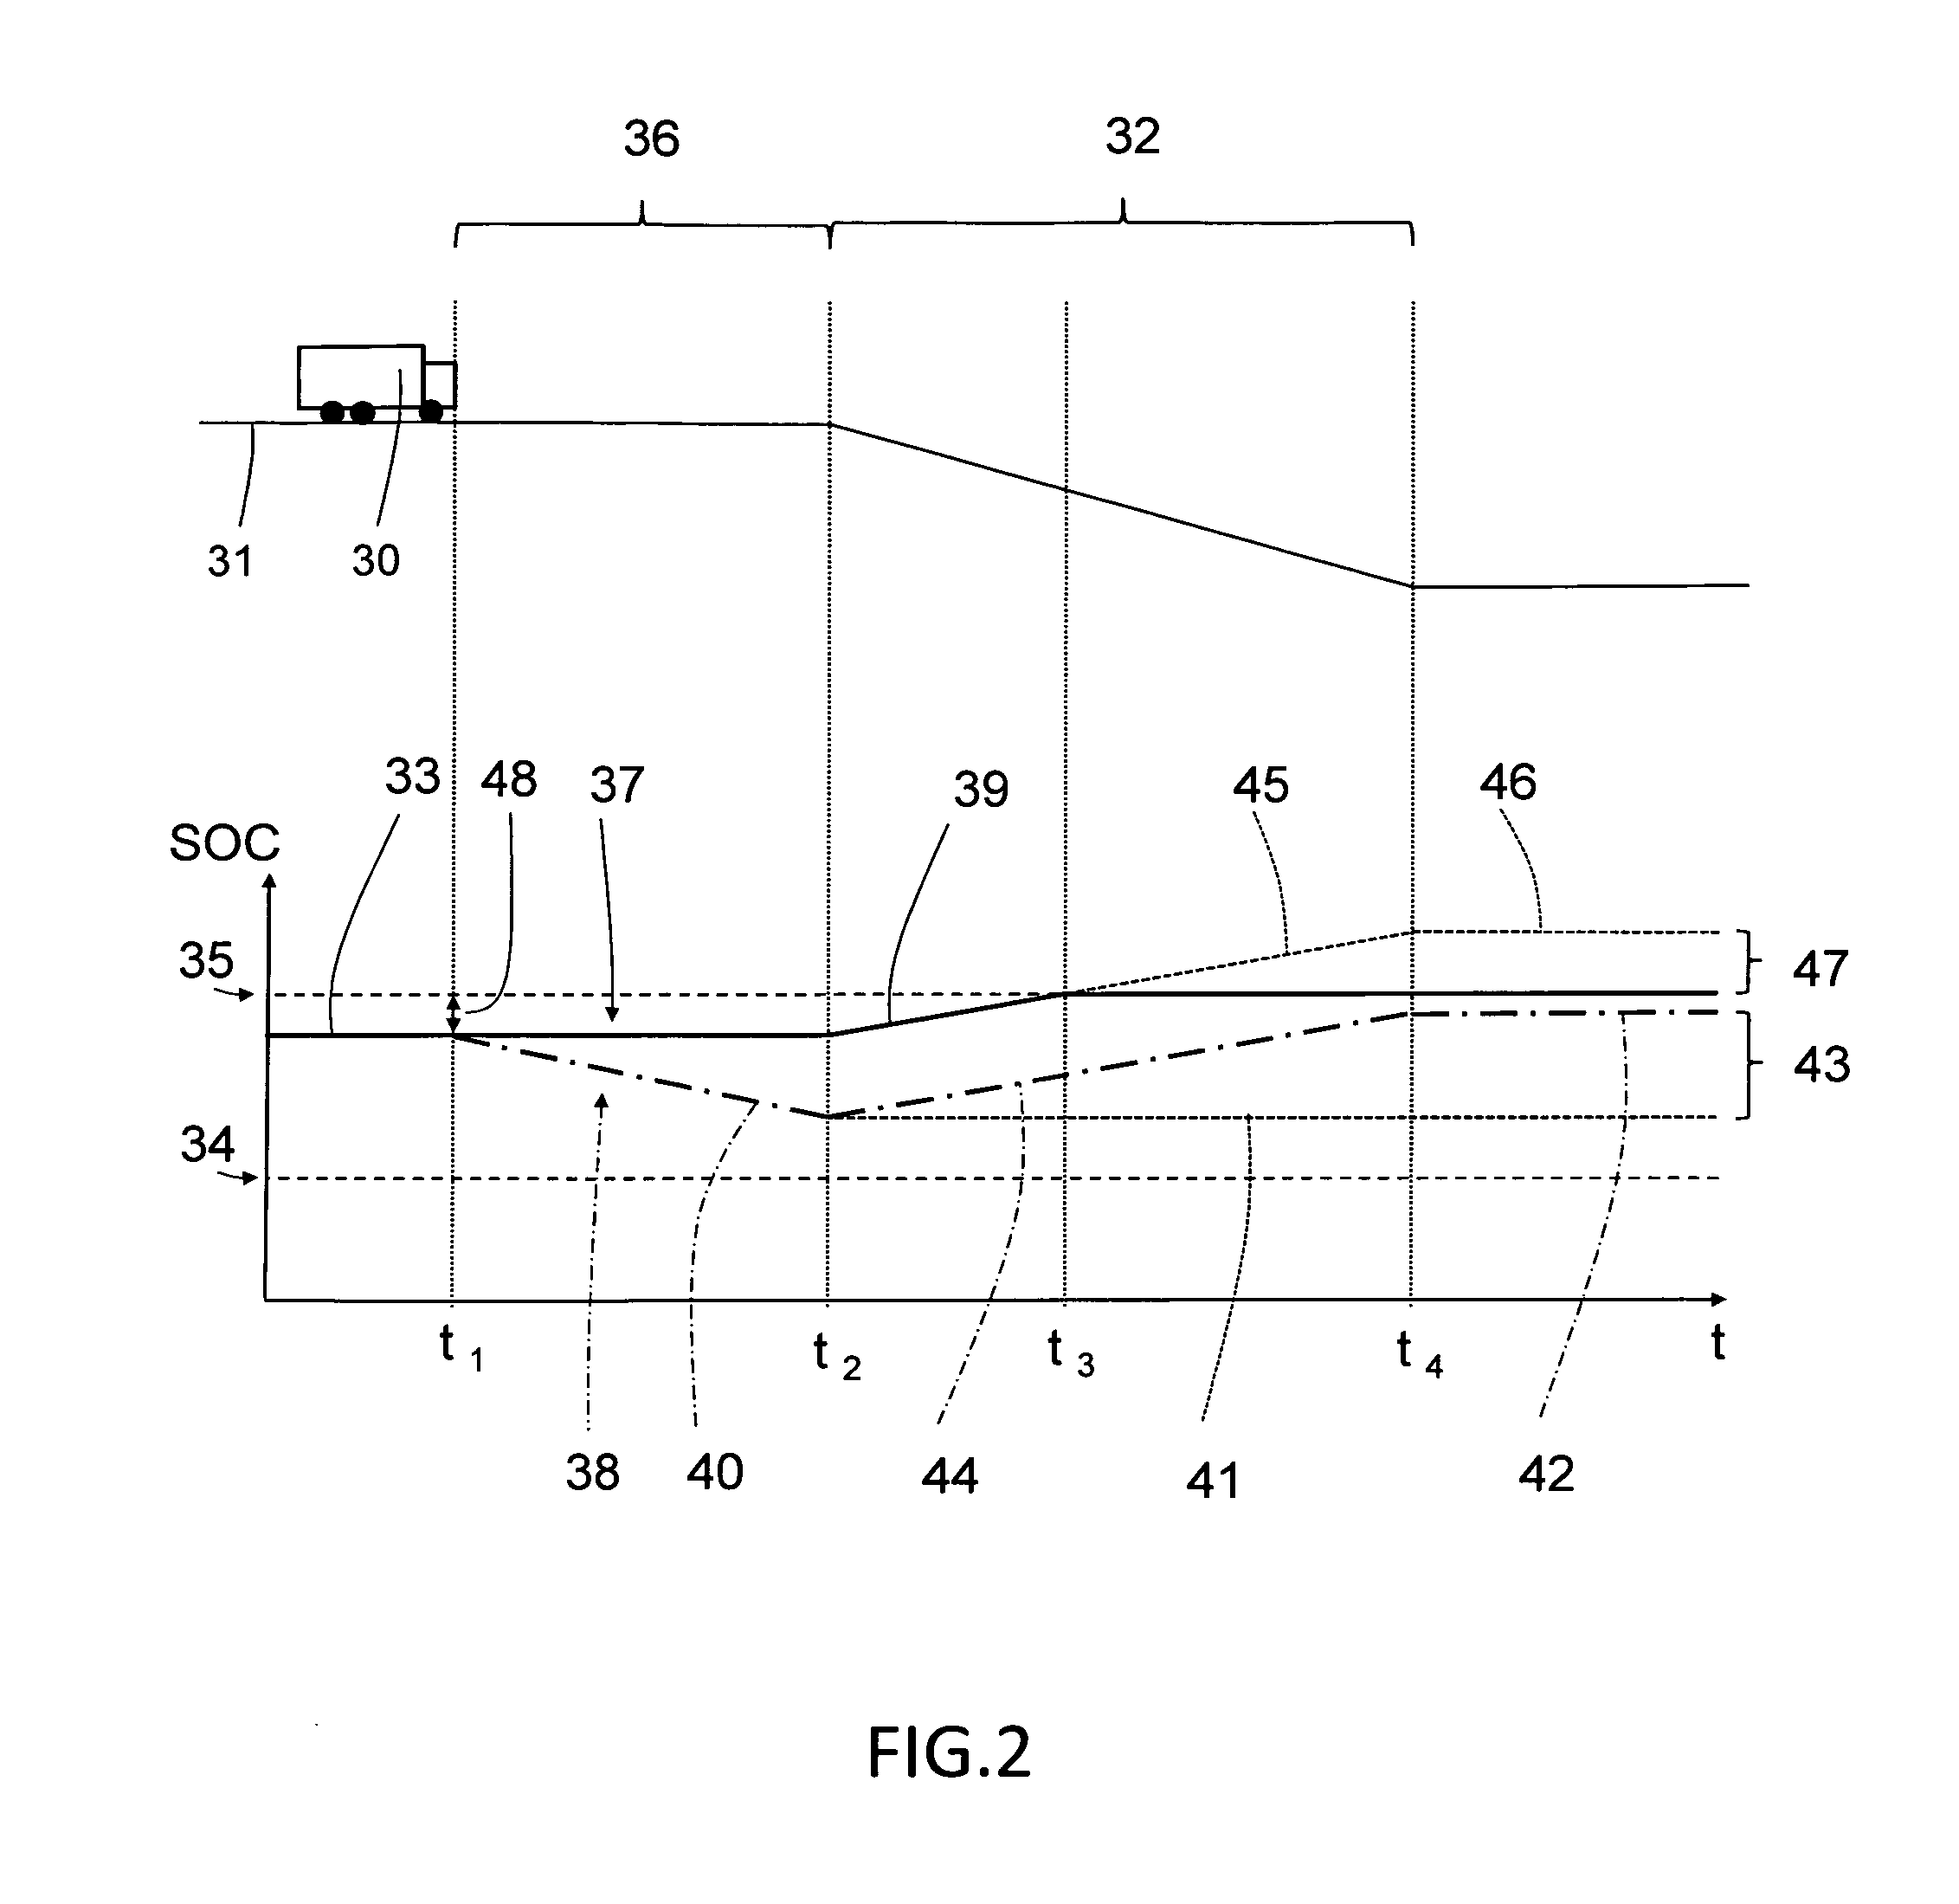 Energy management system and fuel saving method for a hybrid electric vehicle